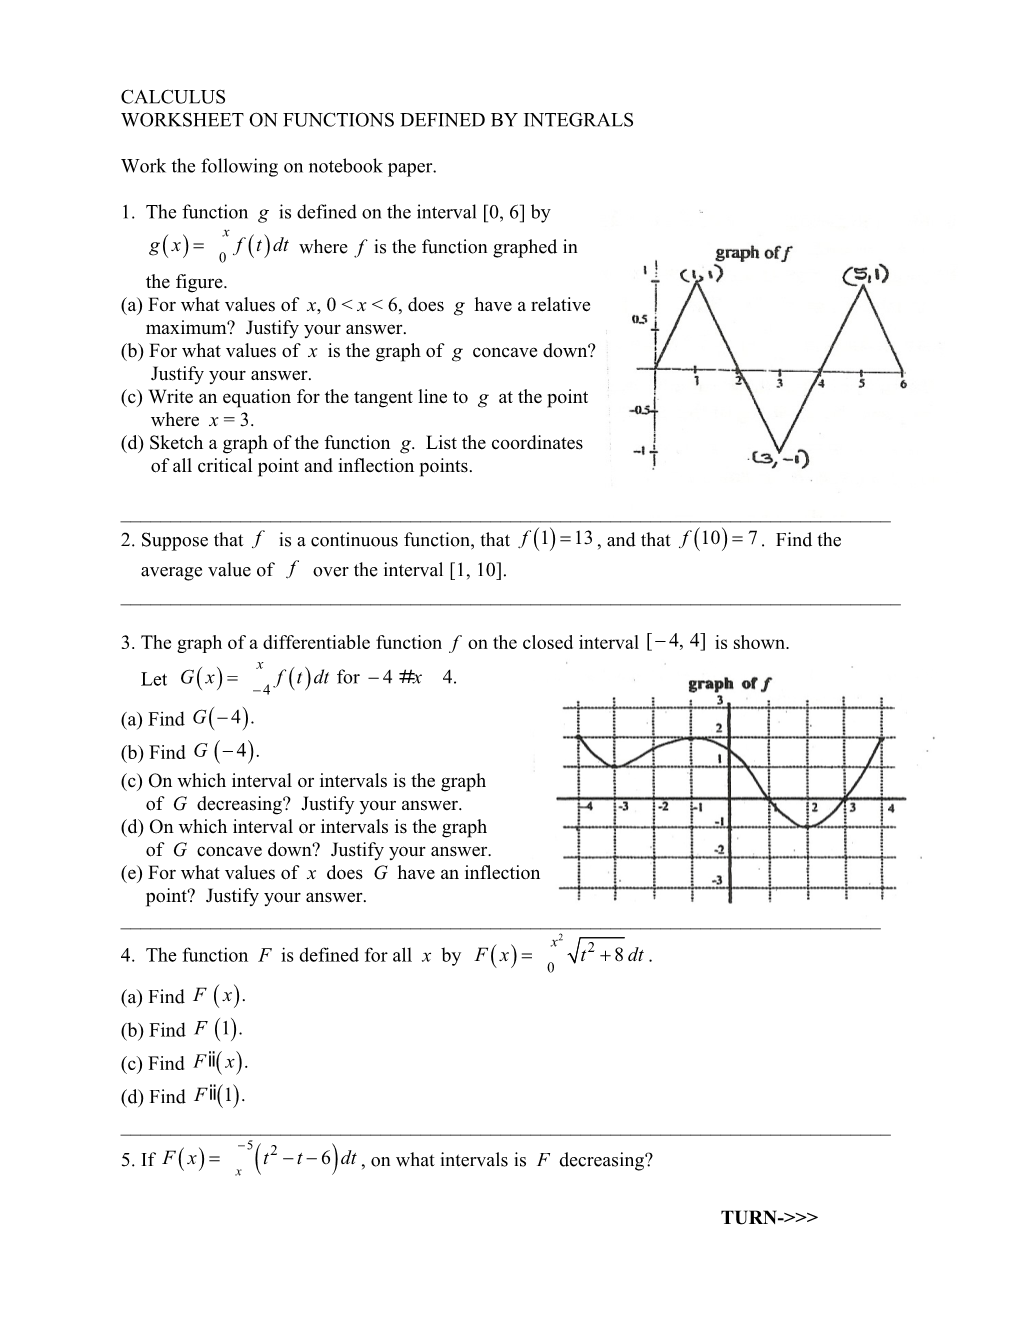 Worksheet on Functions Defined by Integrals